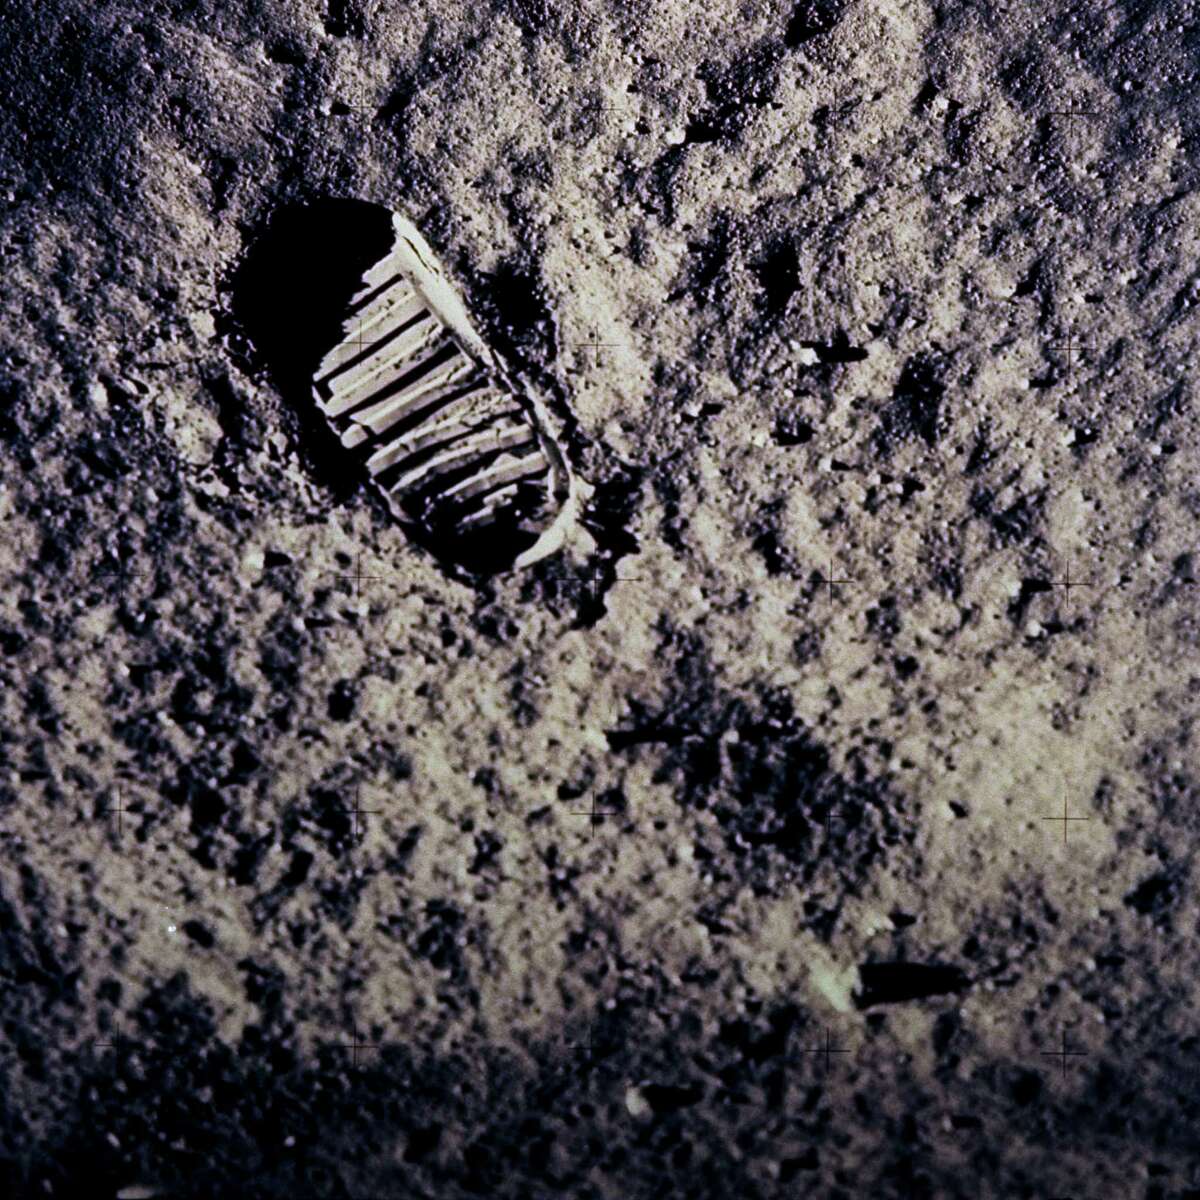 NASA astronauts Neil Armstrong and Buzz Aldrin spent a little over two hours on the moon's surface on July 20, 1969, the first of five landings on Earth's closest neighbor.